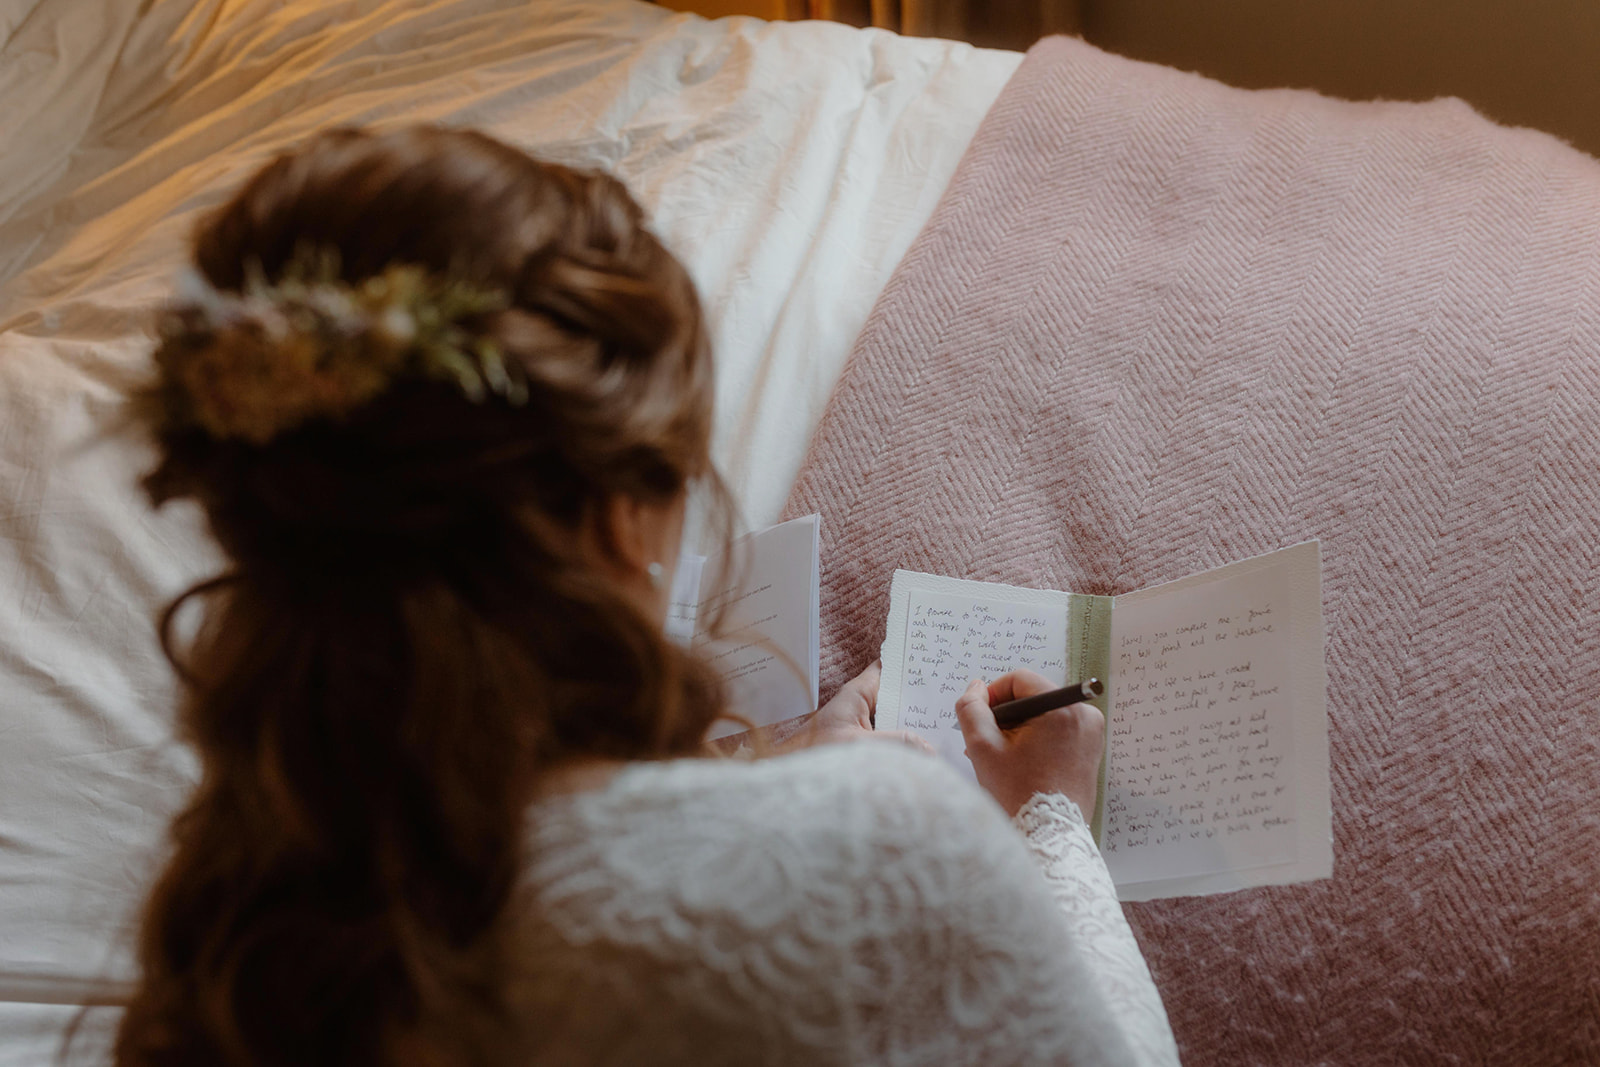 Holly wrote a heartfelt message to James before their Glencoe elopement ceremony, expressing her love and excitement 